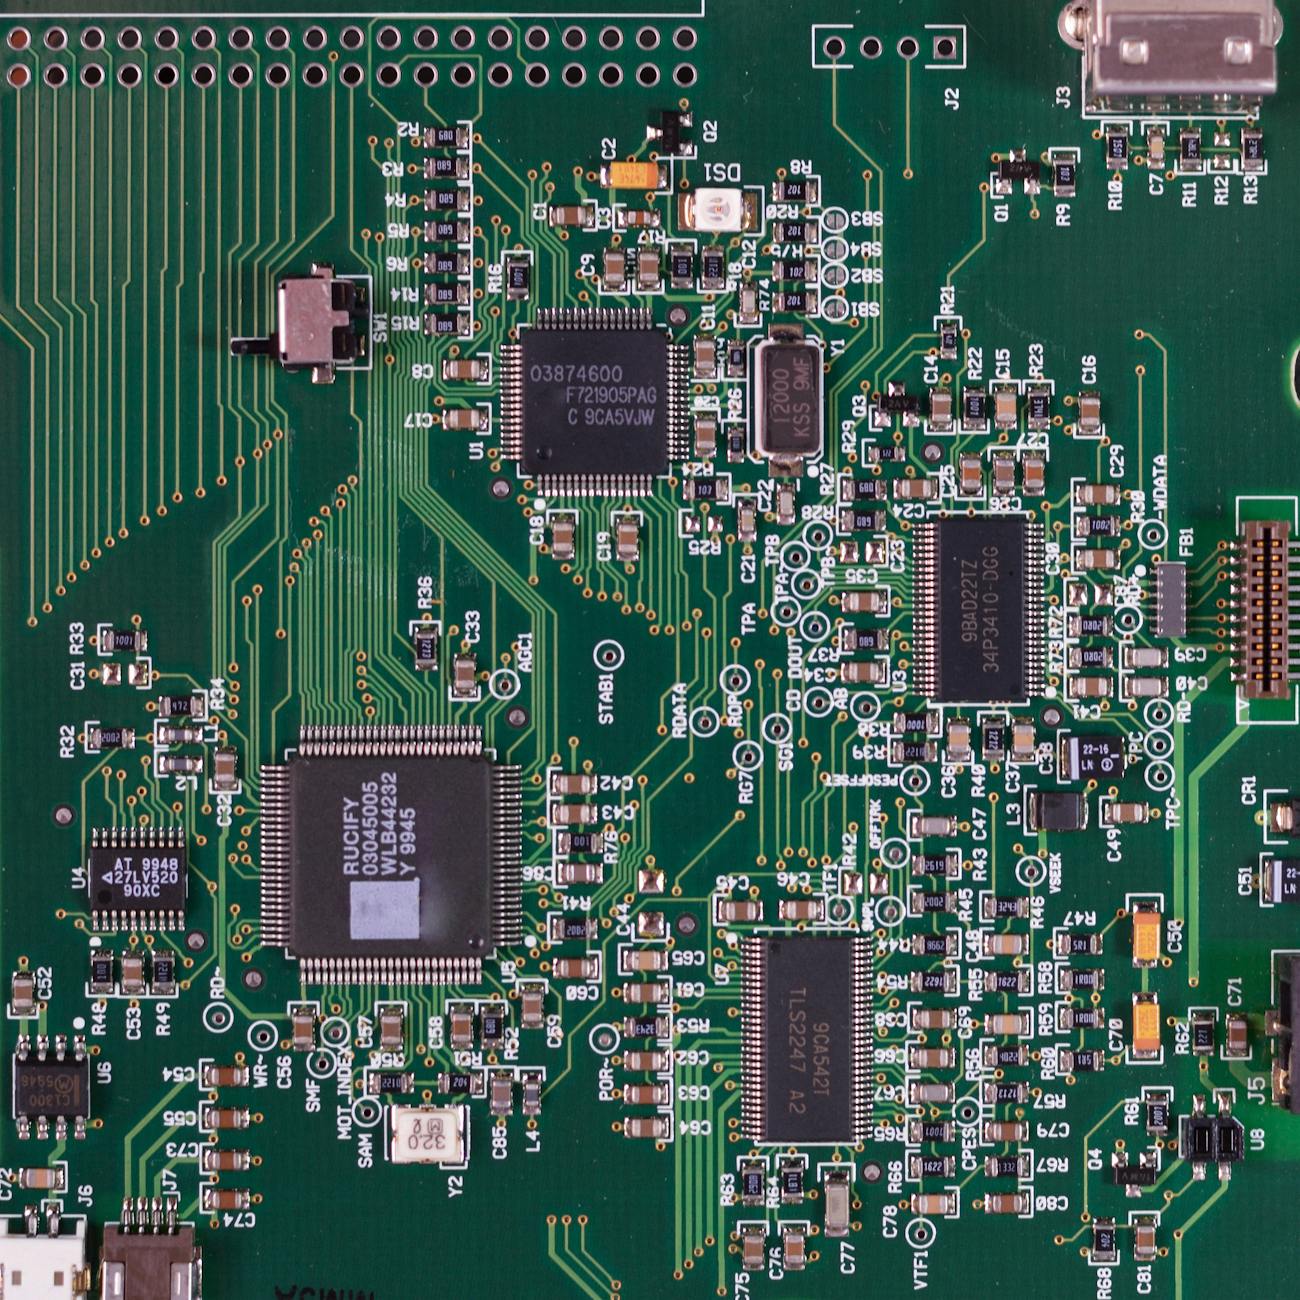 Image of a motherboard as an example or an application for integrated circuits.